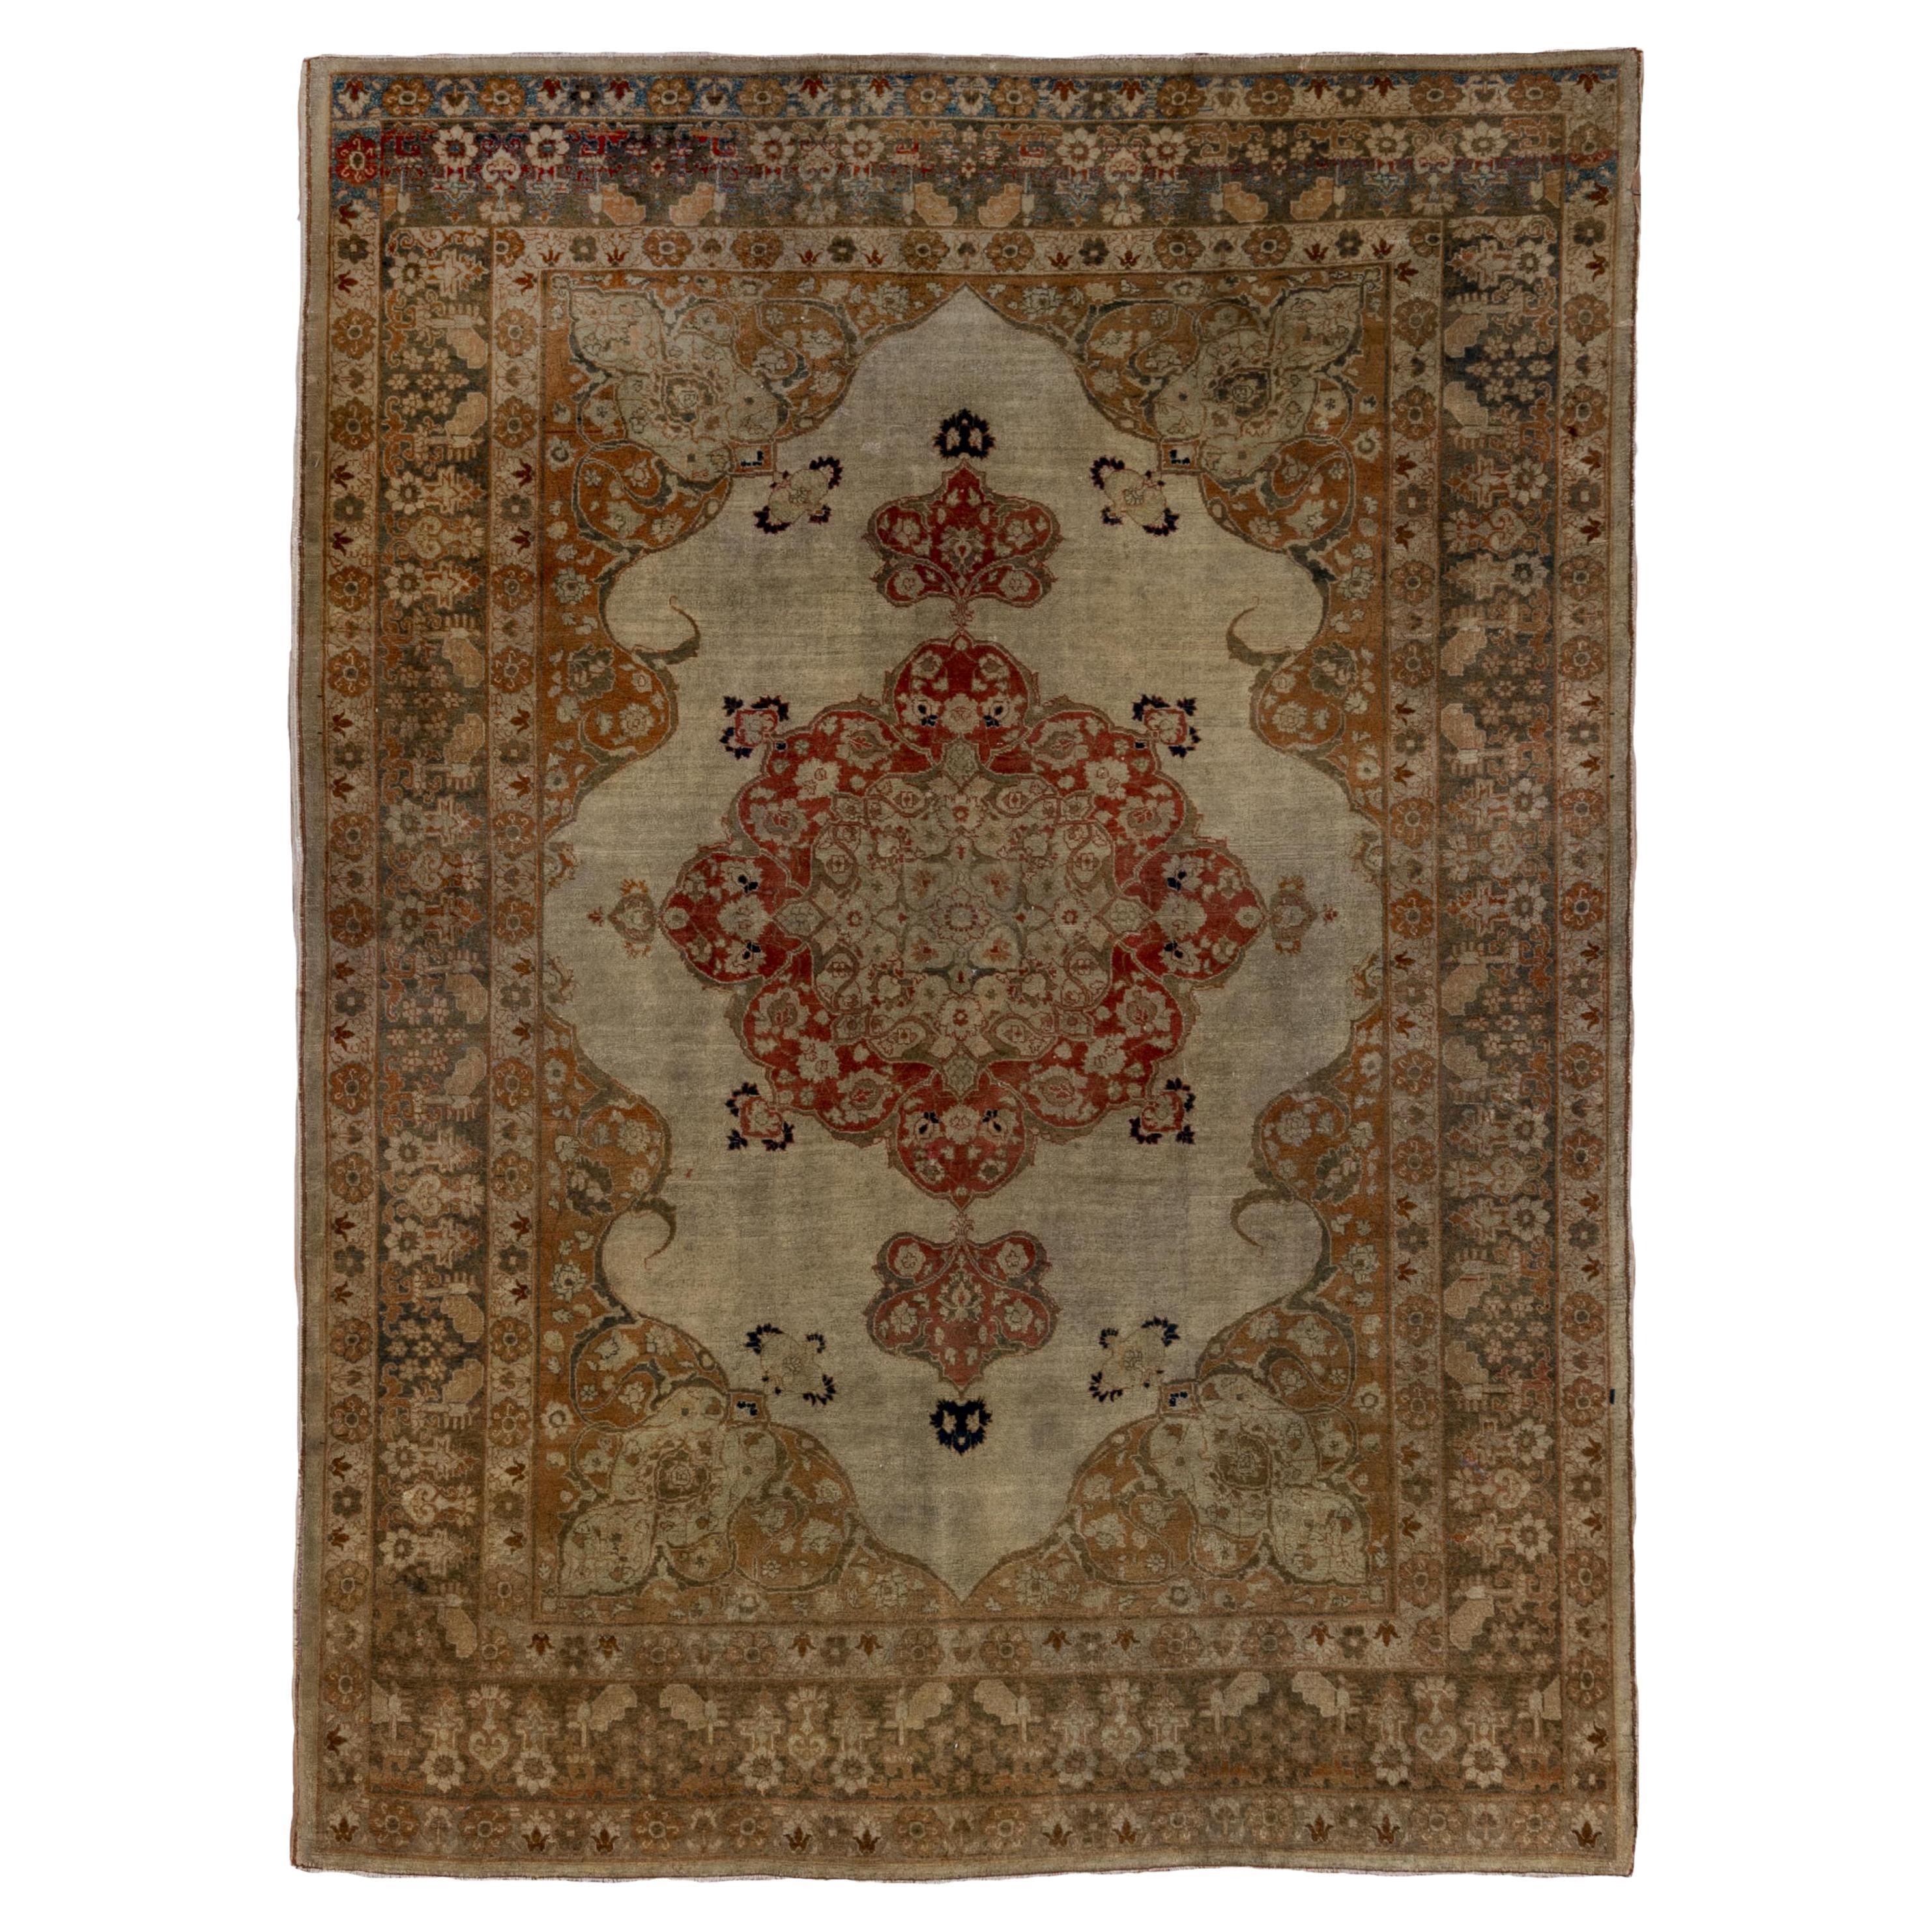 Ornate Central Medallion Tabriz Rug in Rusted Olive with Royal Red Accents